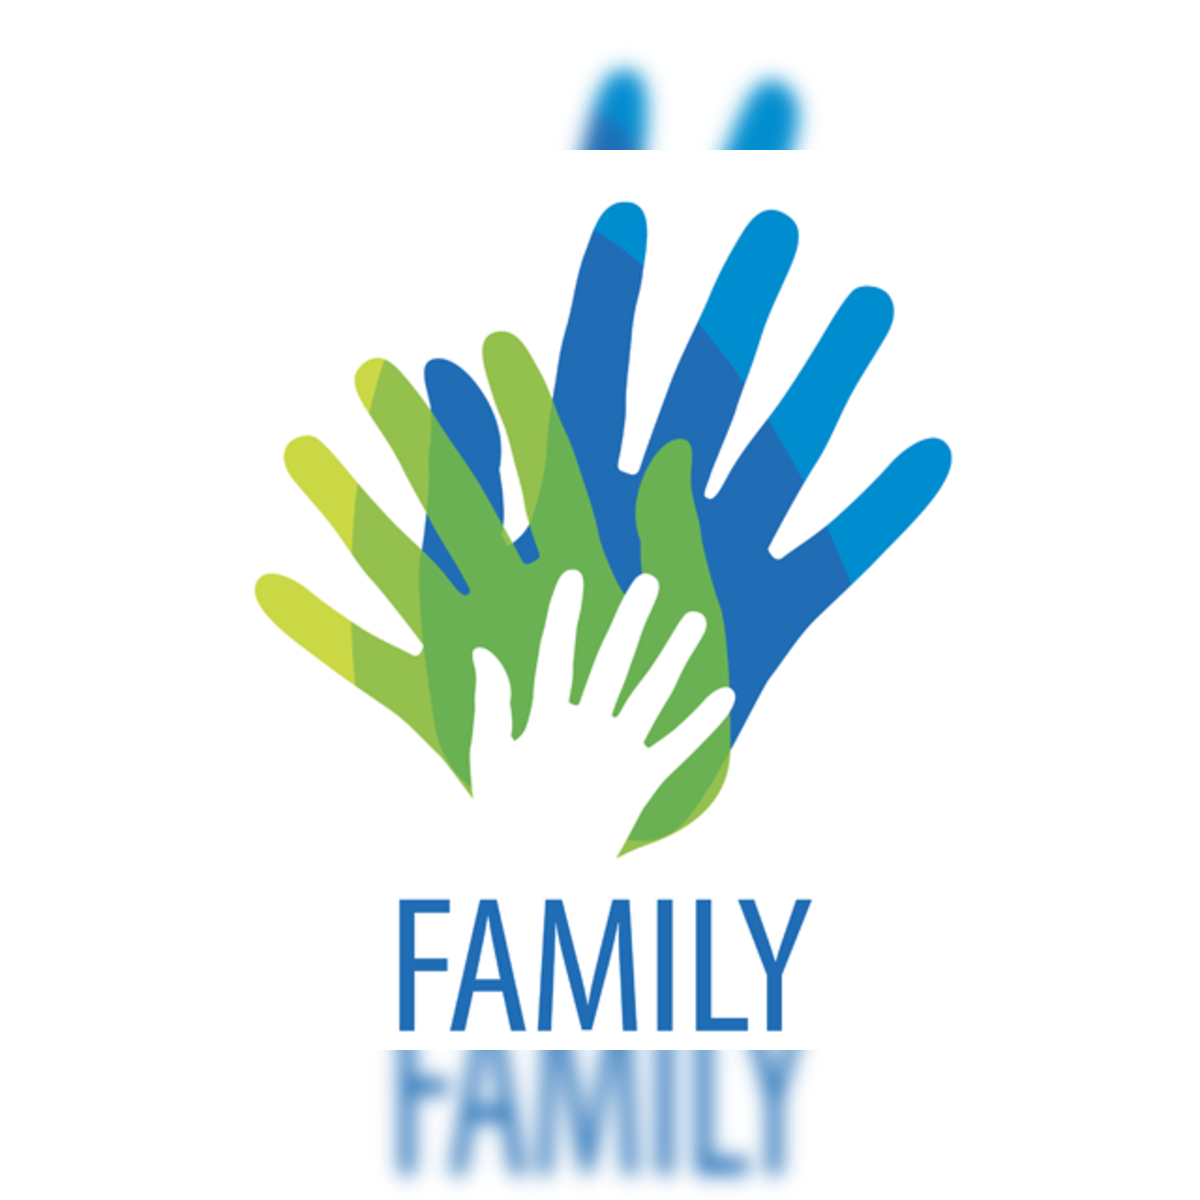 The Family Group Foundation